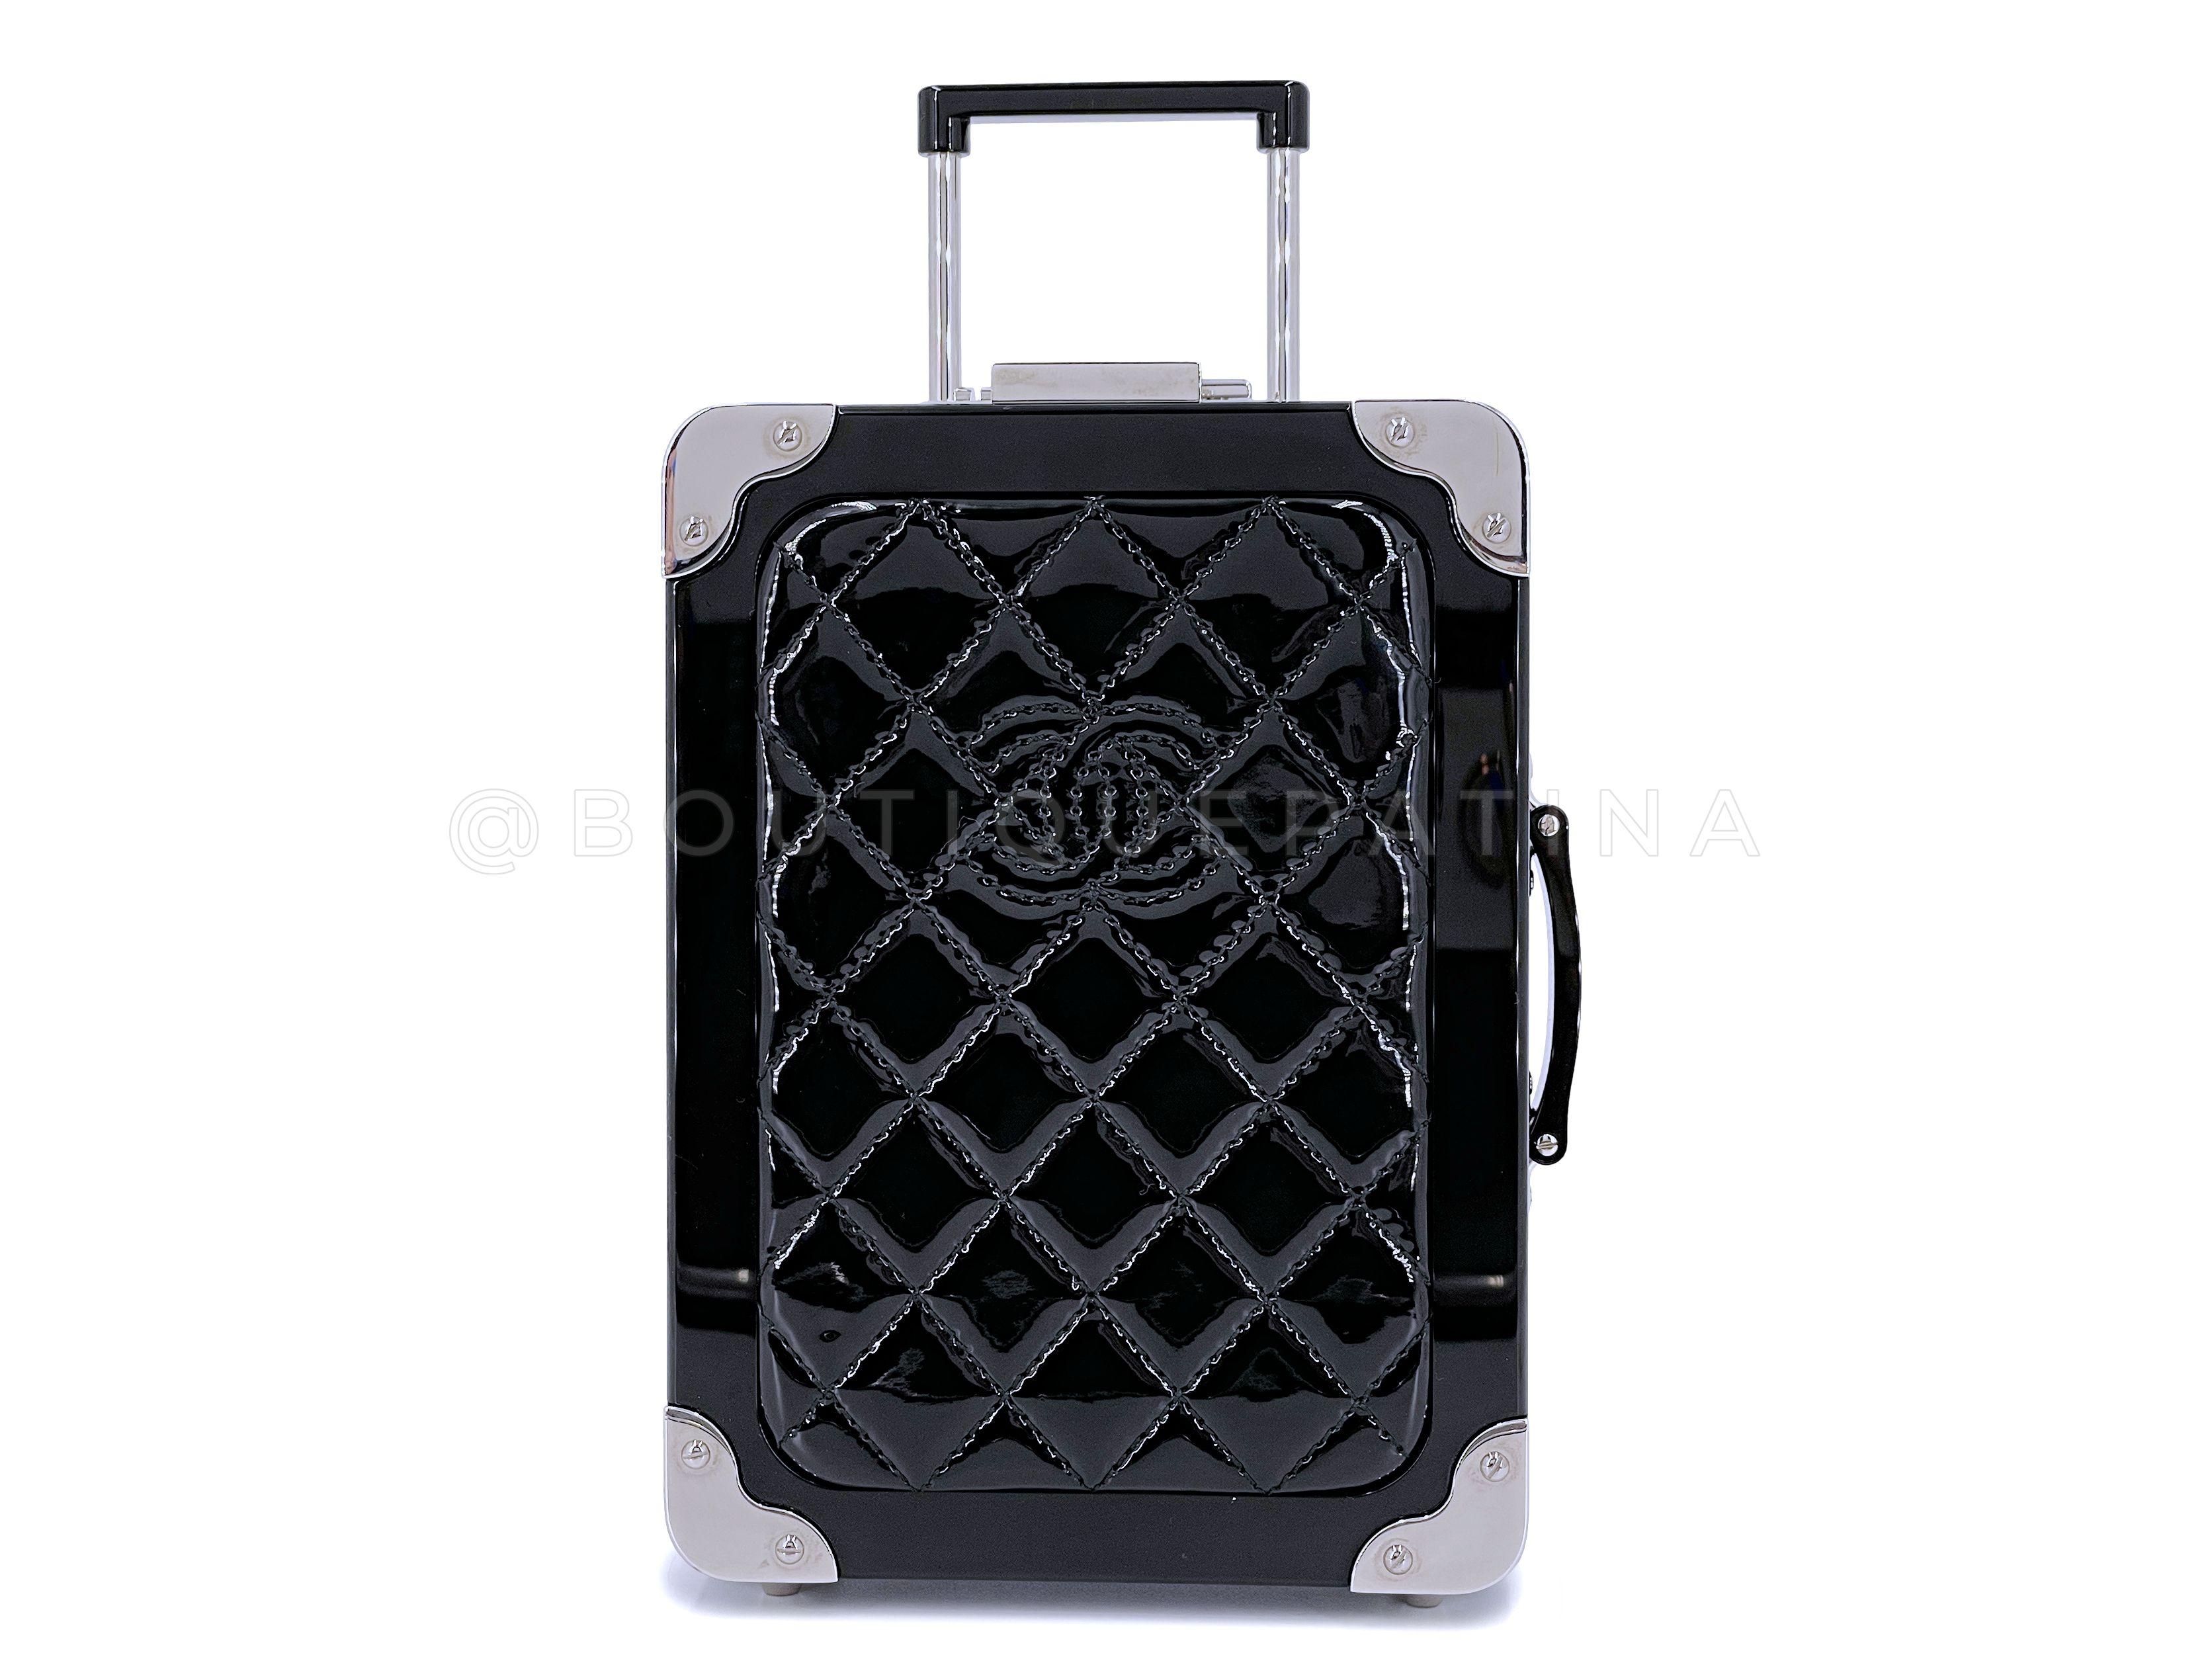 Store item: 67163
Chanel 2016 Airlines Evening In The Air Trolley Minaudière Clutch Bag Black Patent
From Lagerfeld's 2016 Spring Airlines collection, with black leather interior, working telescopic handle and stainless steel feet and wheels. 

In